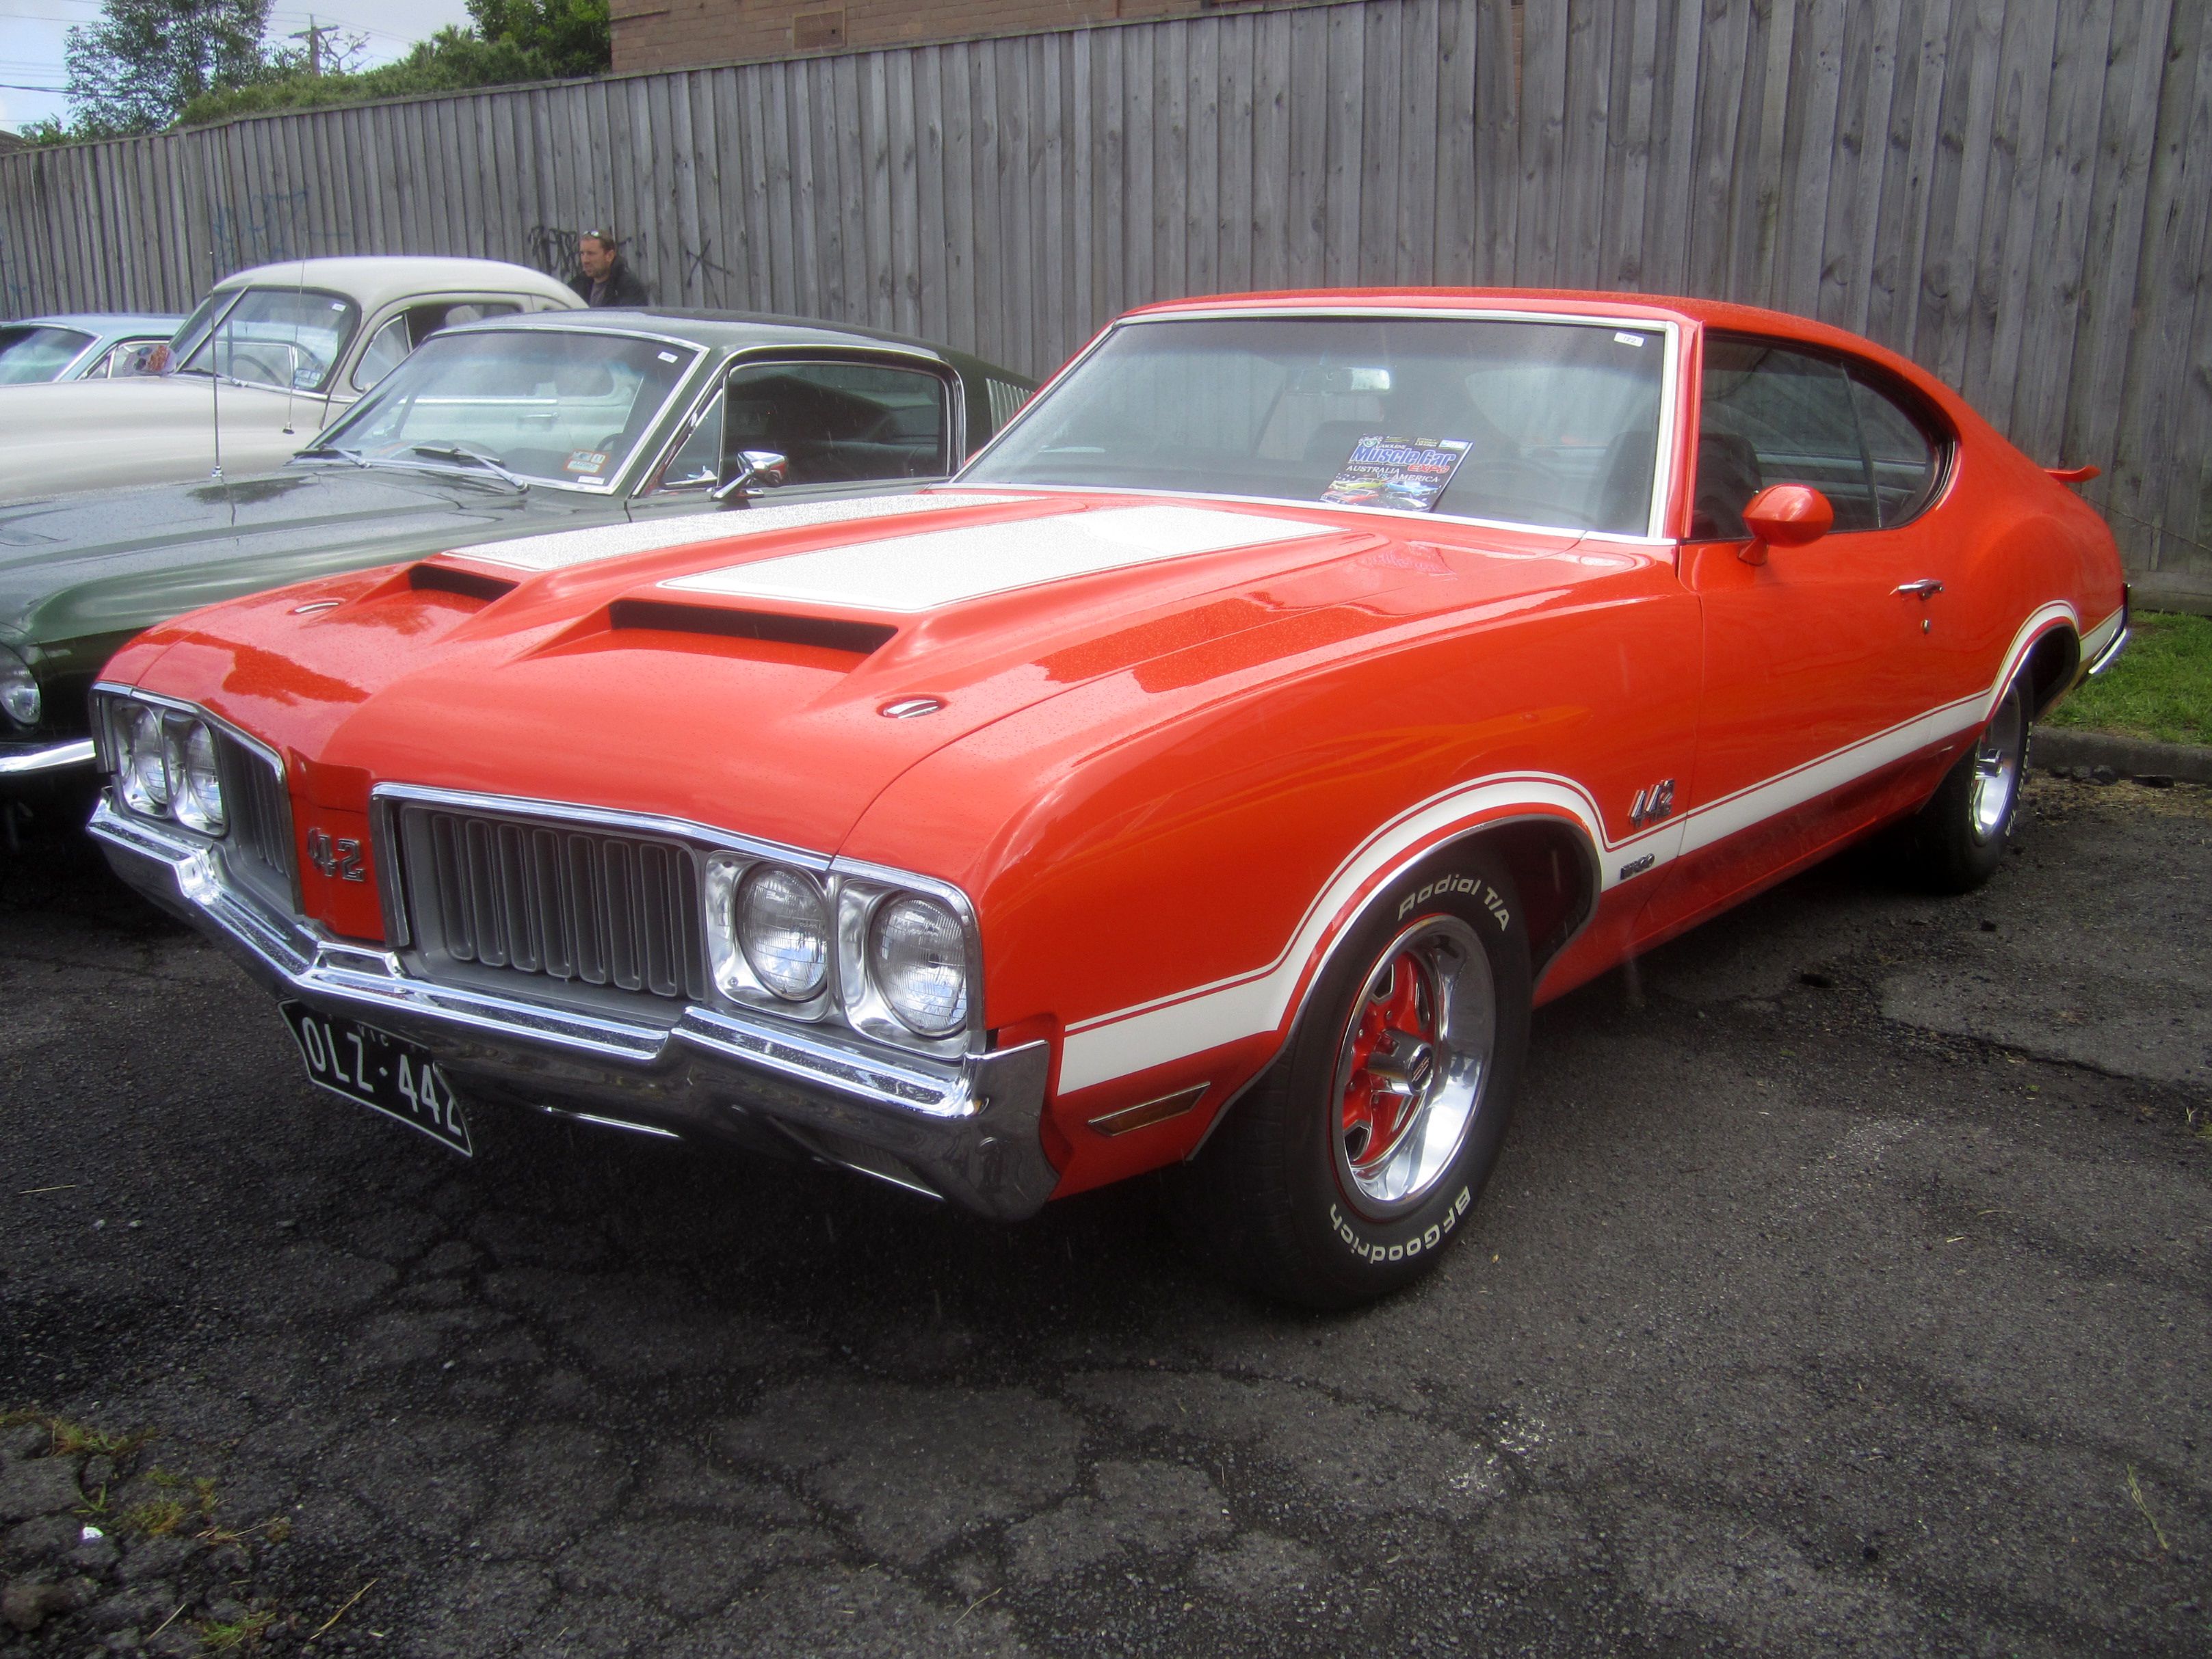 A parked 1970 Olds 442 W30